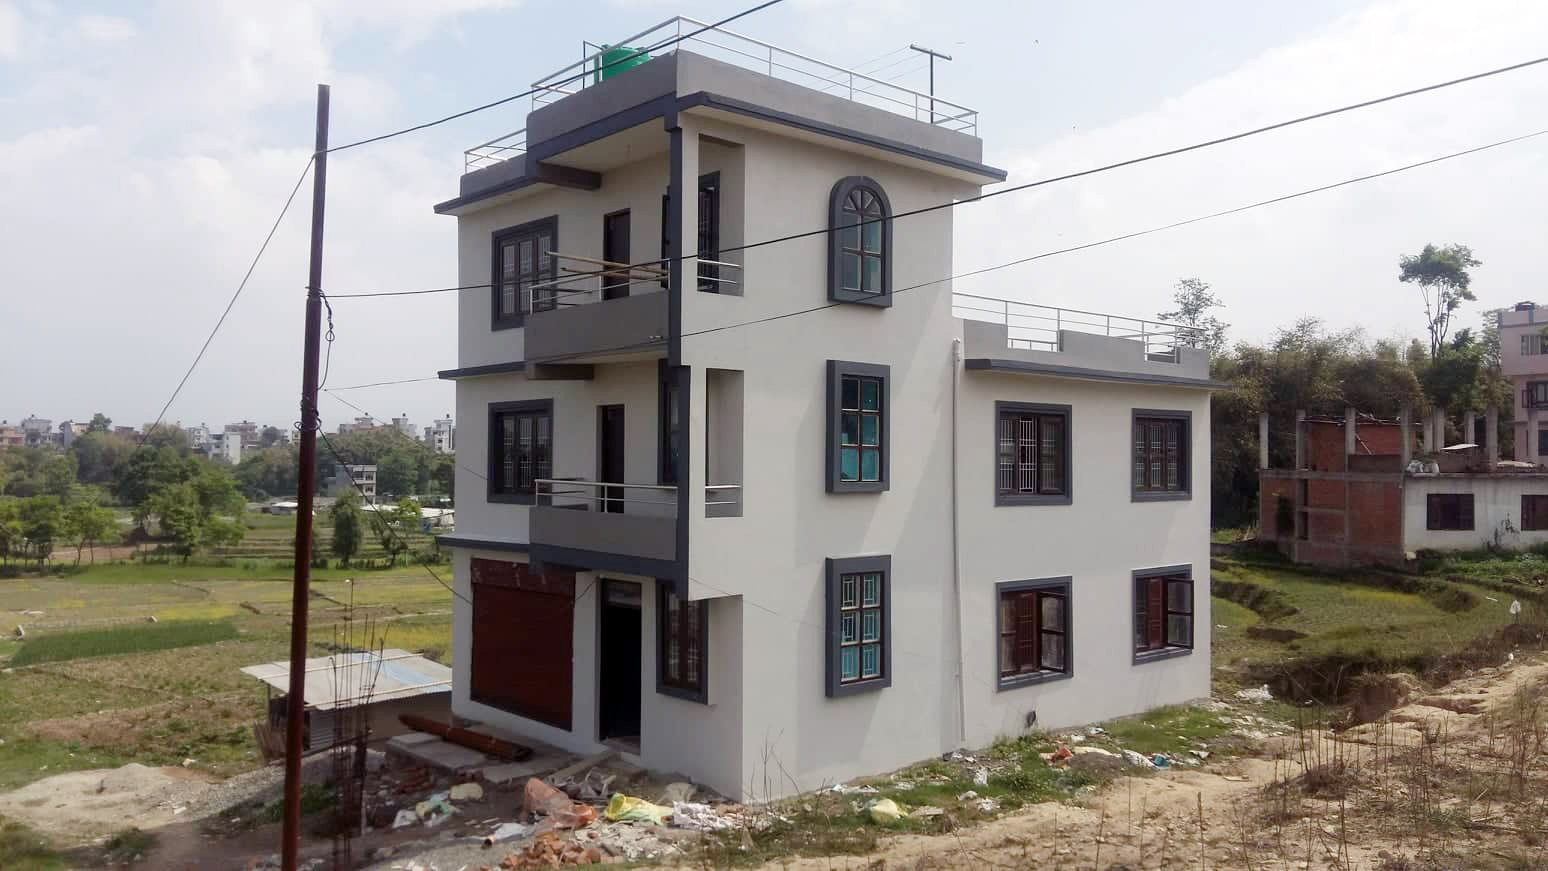 House_for_sale_at_Lubhu_(17).jpg